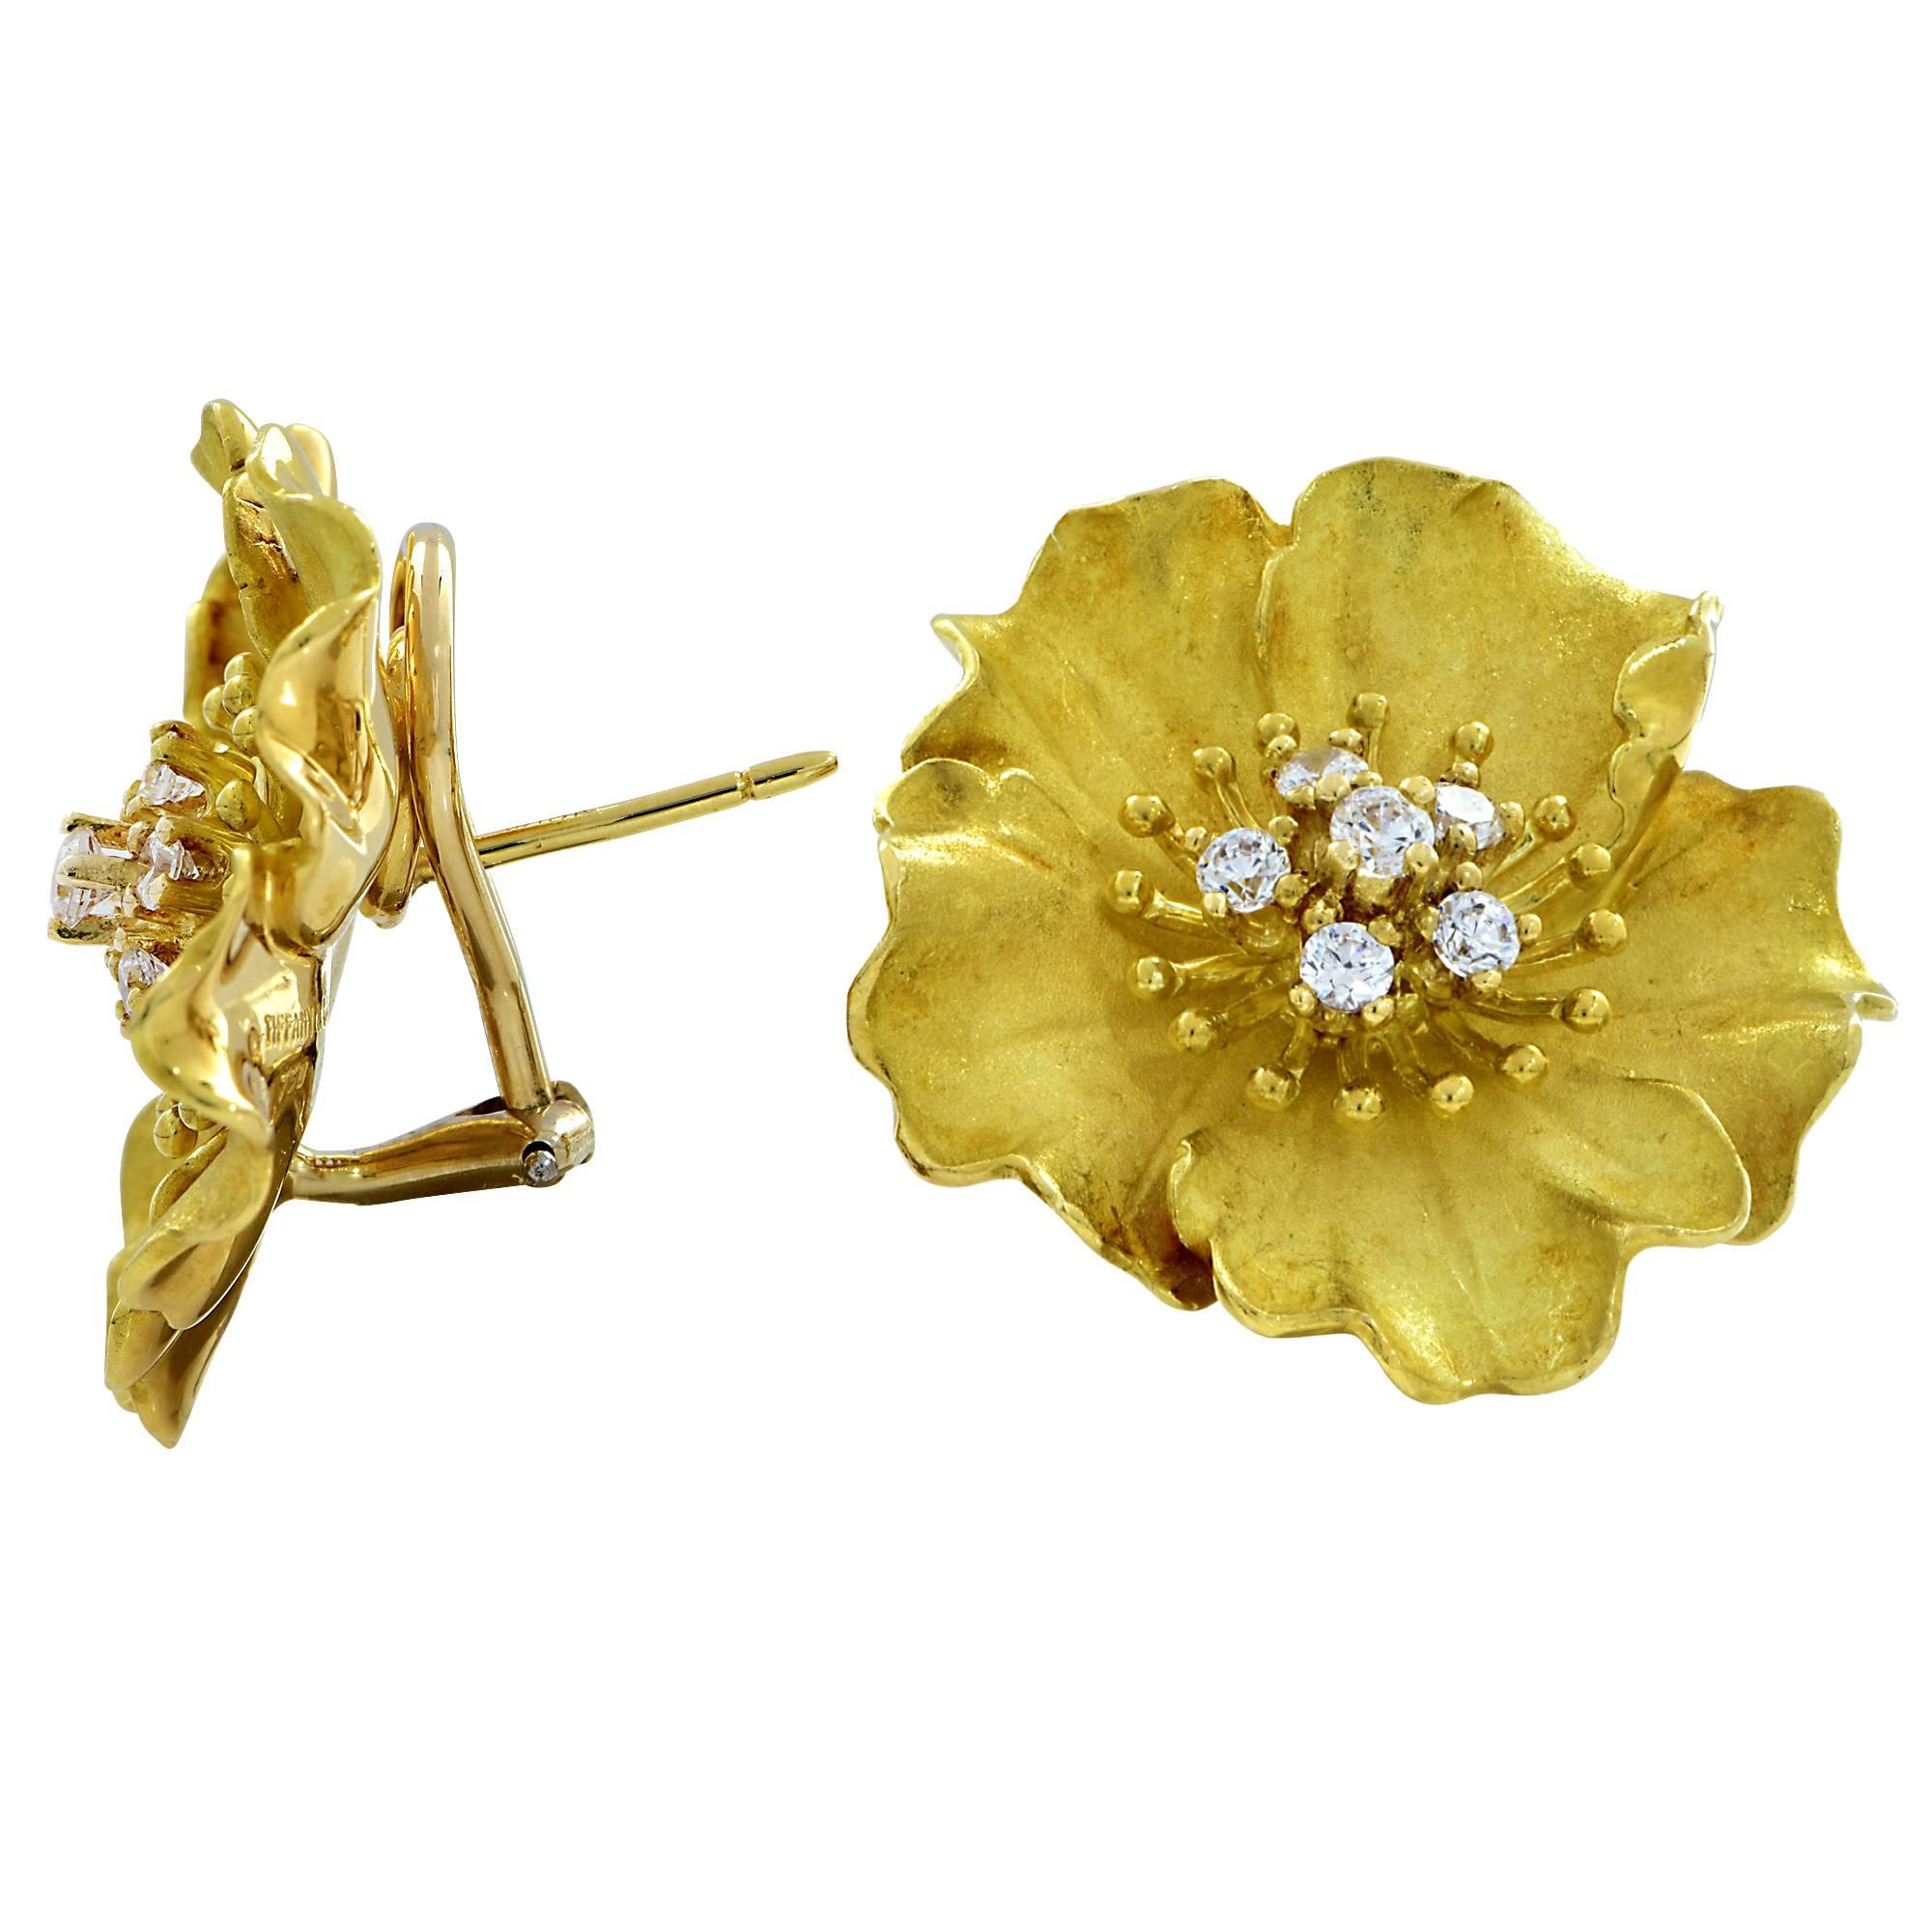 Fabulous 18k yellow gold Tiffany & Co. Alpine Rose earrings circa 1980. Crafted to have 5 flower petals that feature 5 gleaming round brilliant cut diamonds, F-G color, VS1-2 clarity that weigh .75cts total.

These magnificent earrings measure 27mm